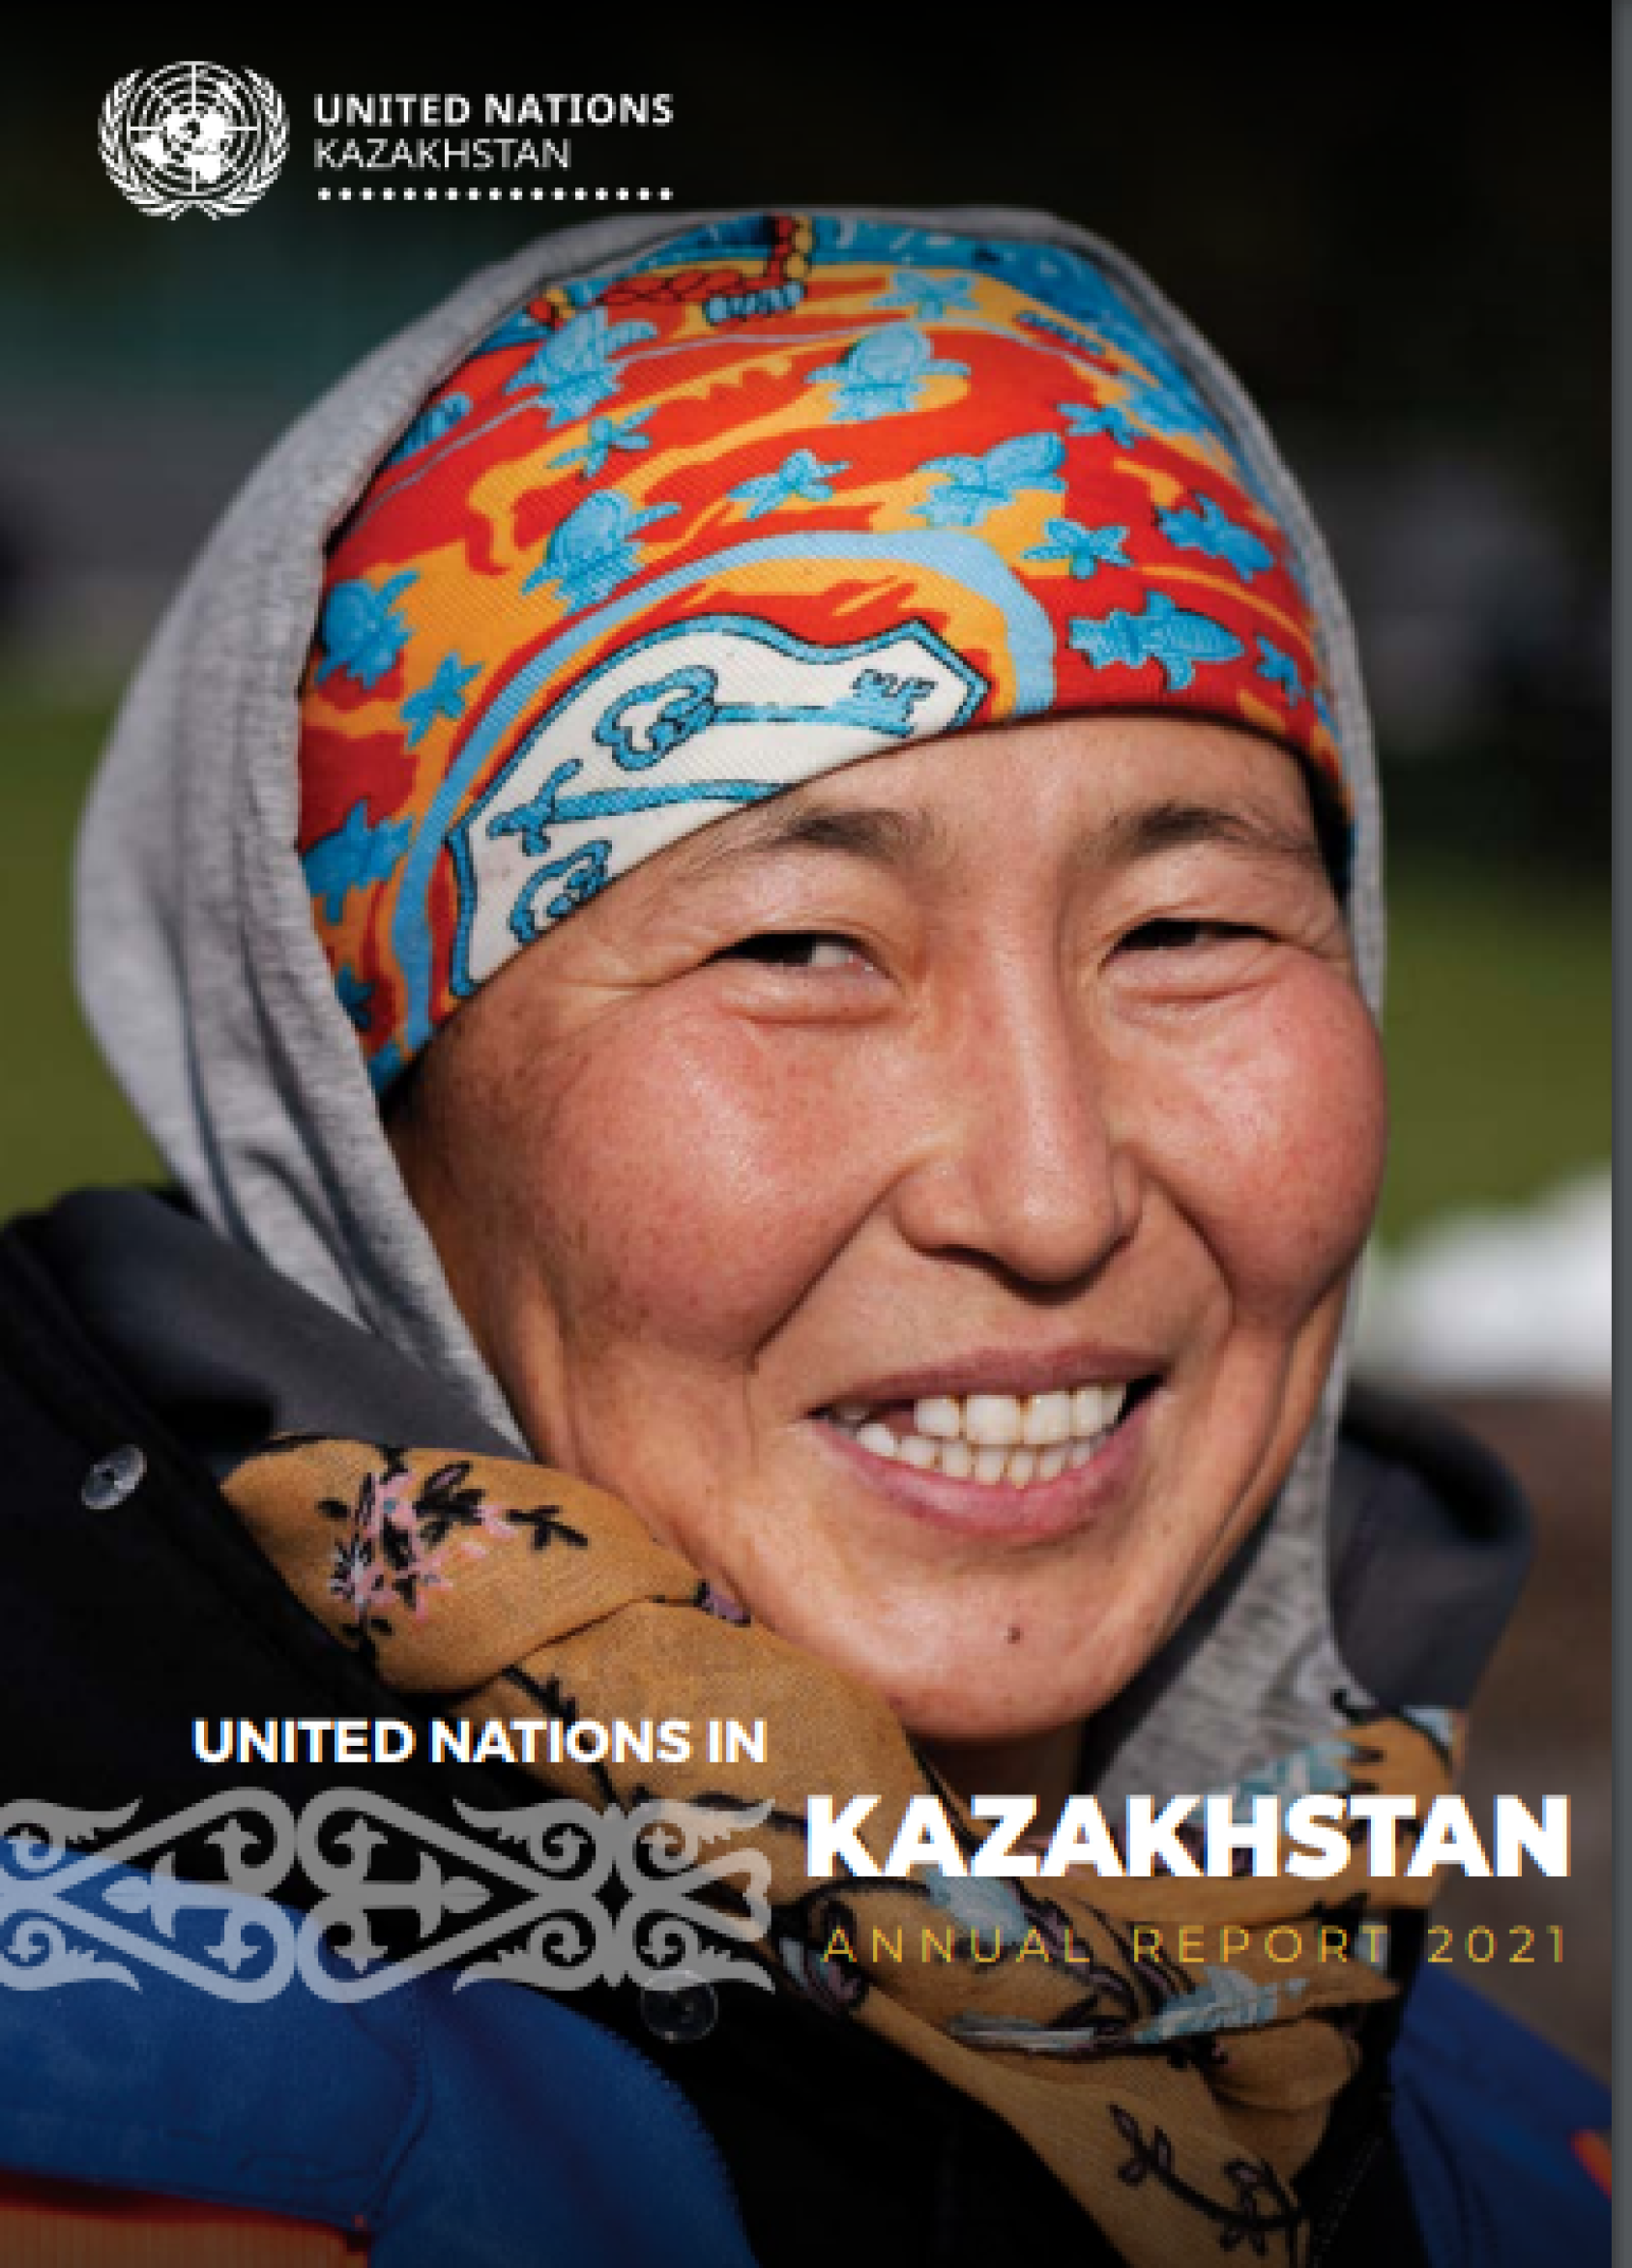 A woman in a colorful headscarf smiles brightly, as a report cover. 